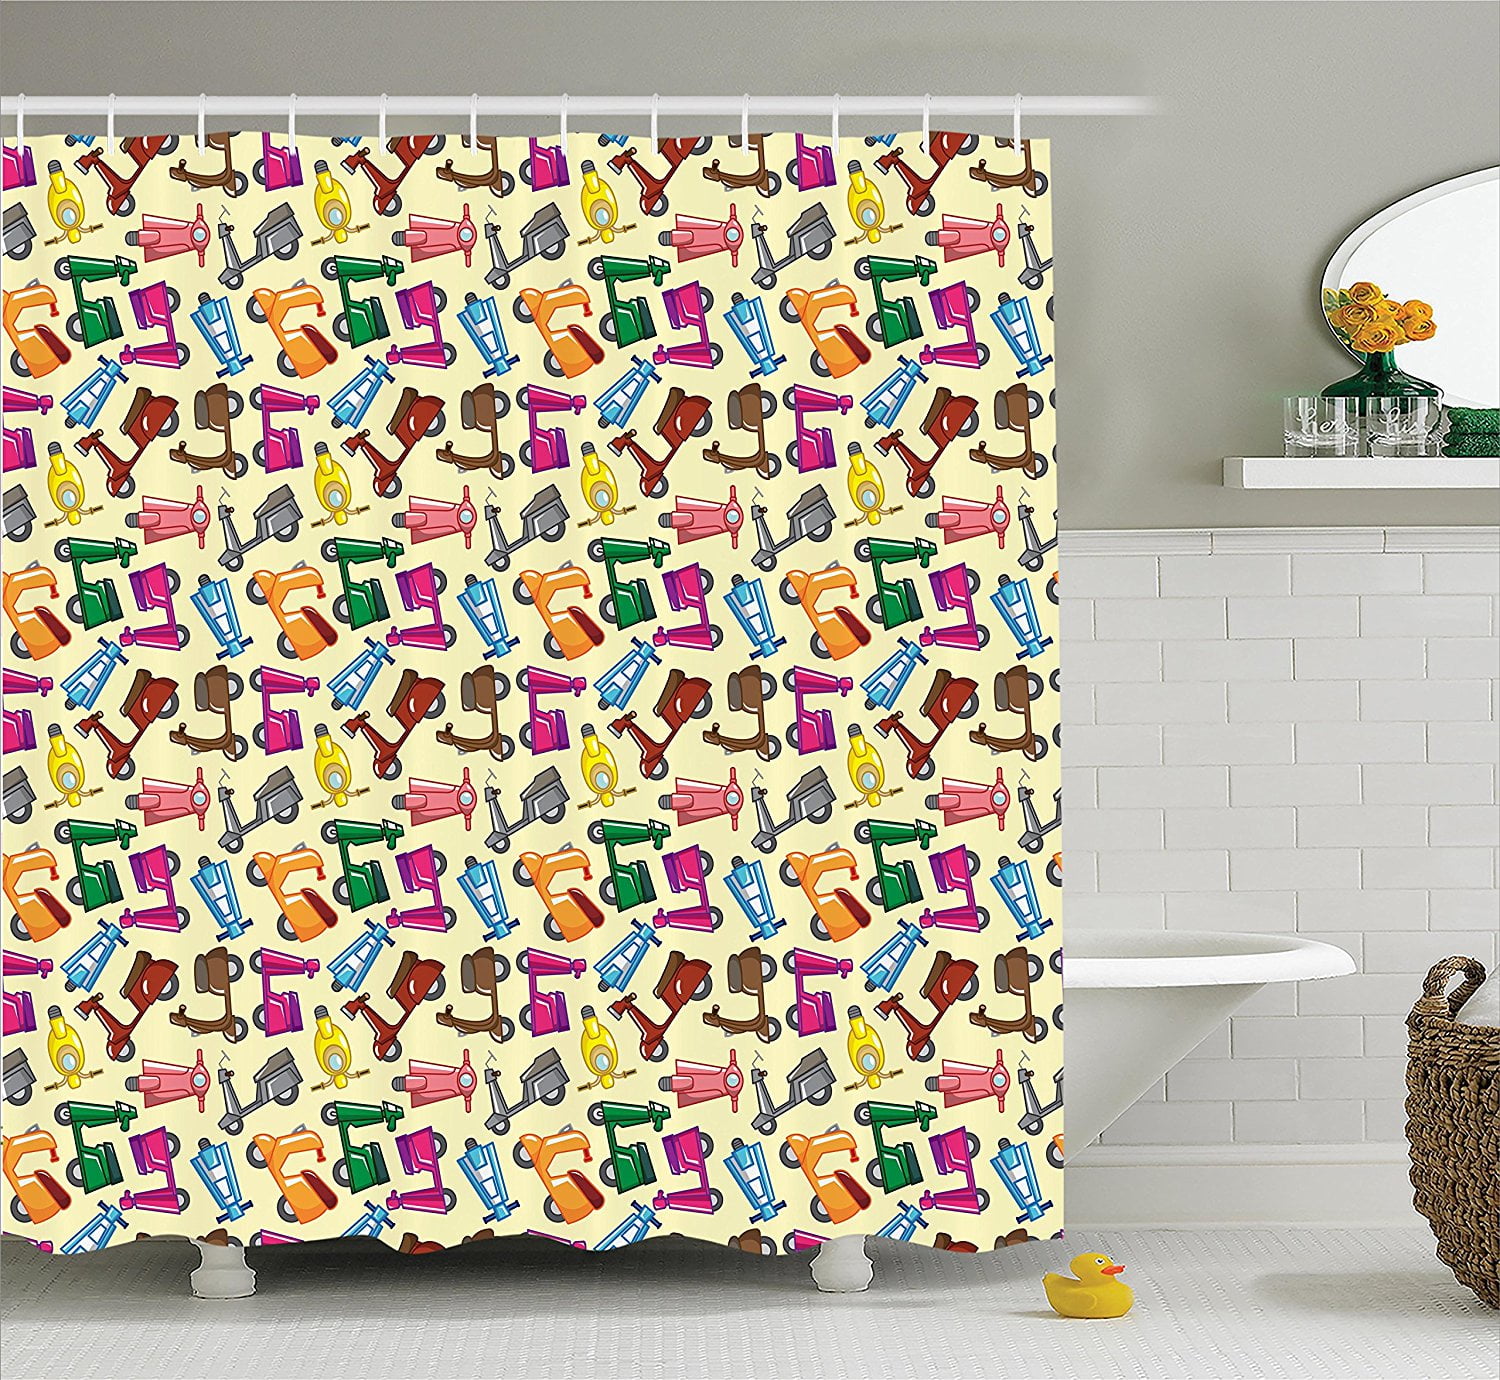 Details about   Colorful Shower Curtain Mushroom Magic Forest Print for Bathroom 